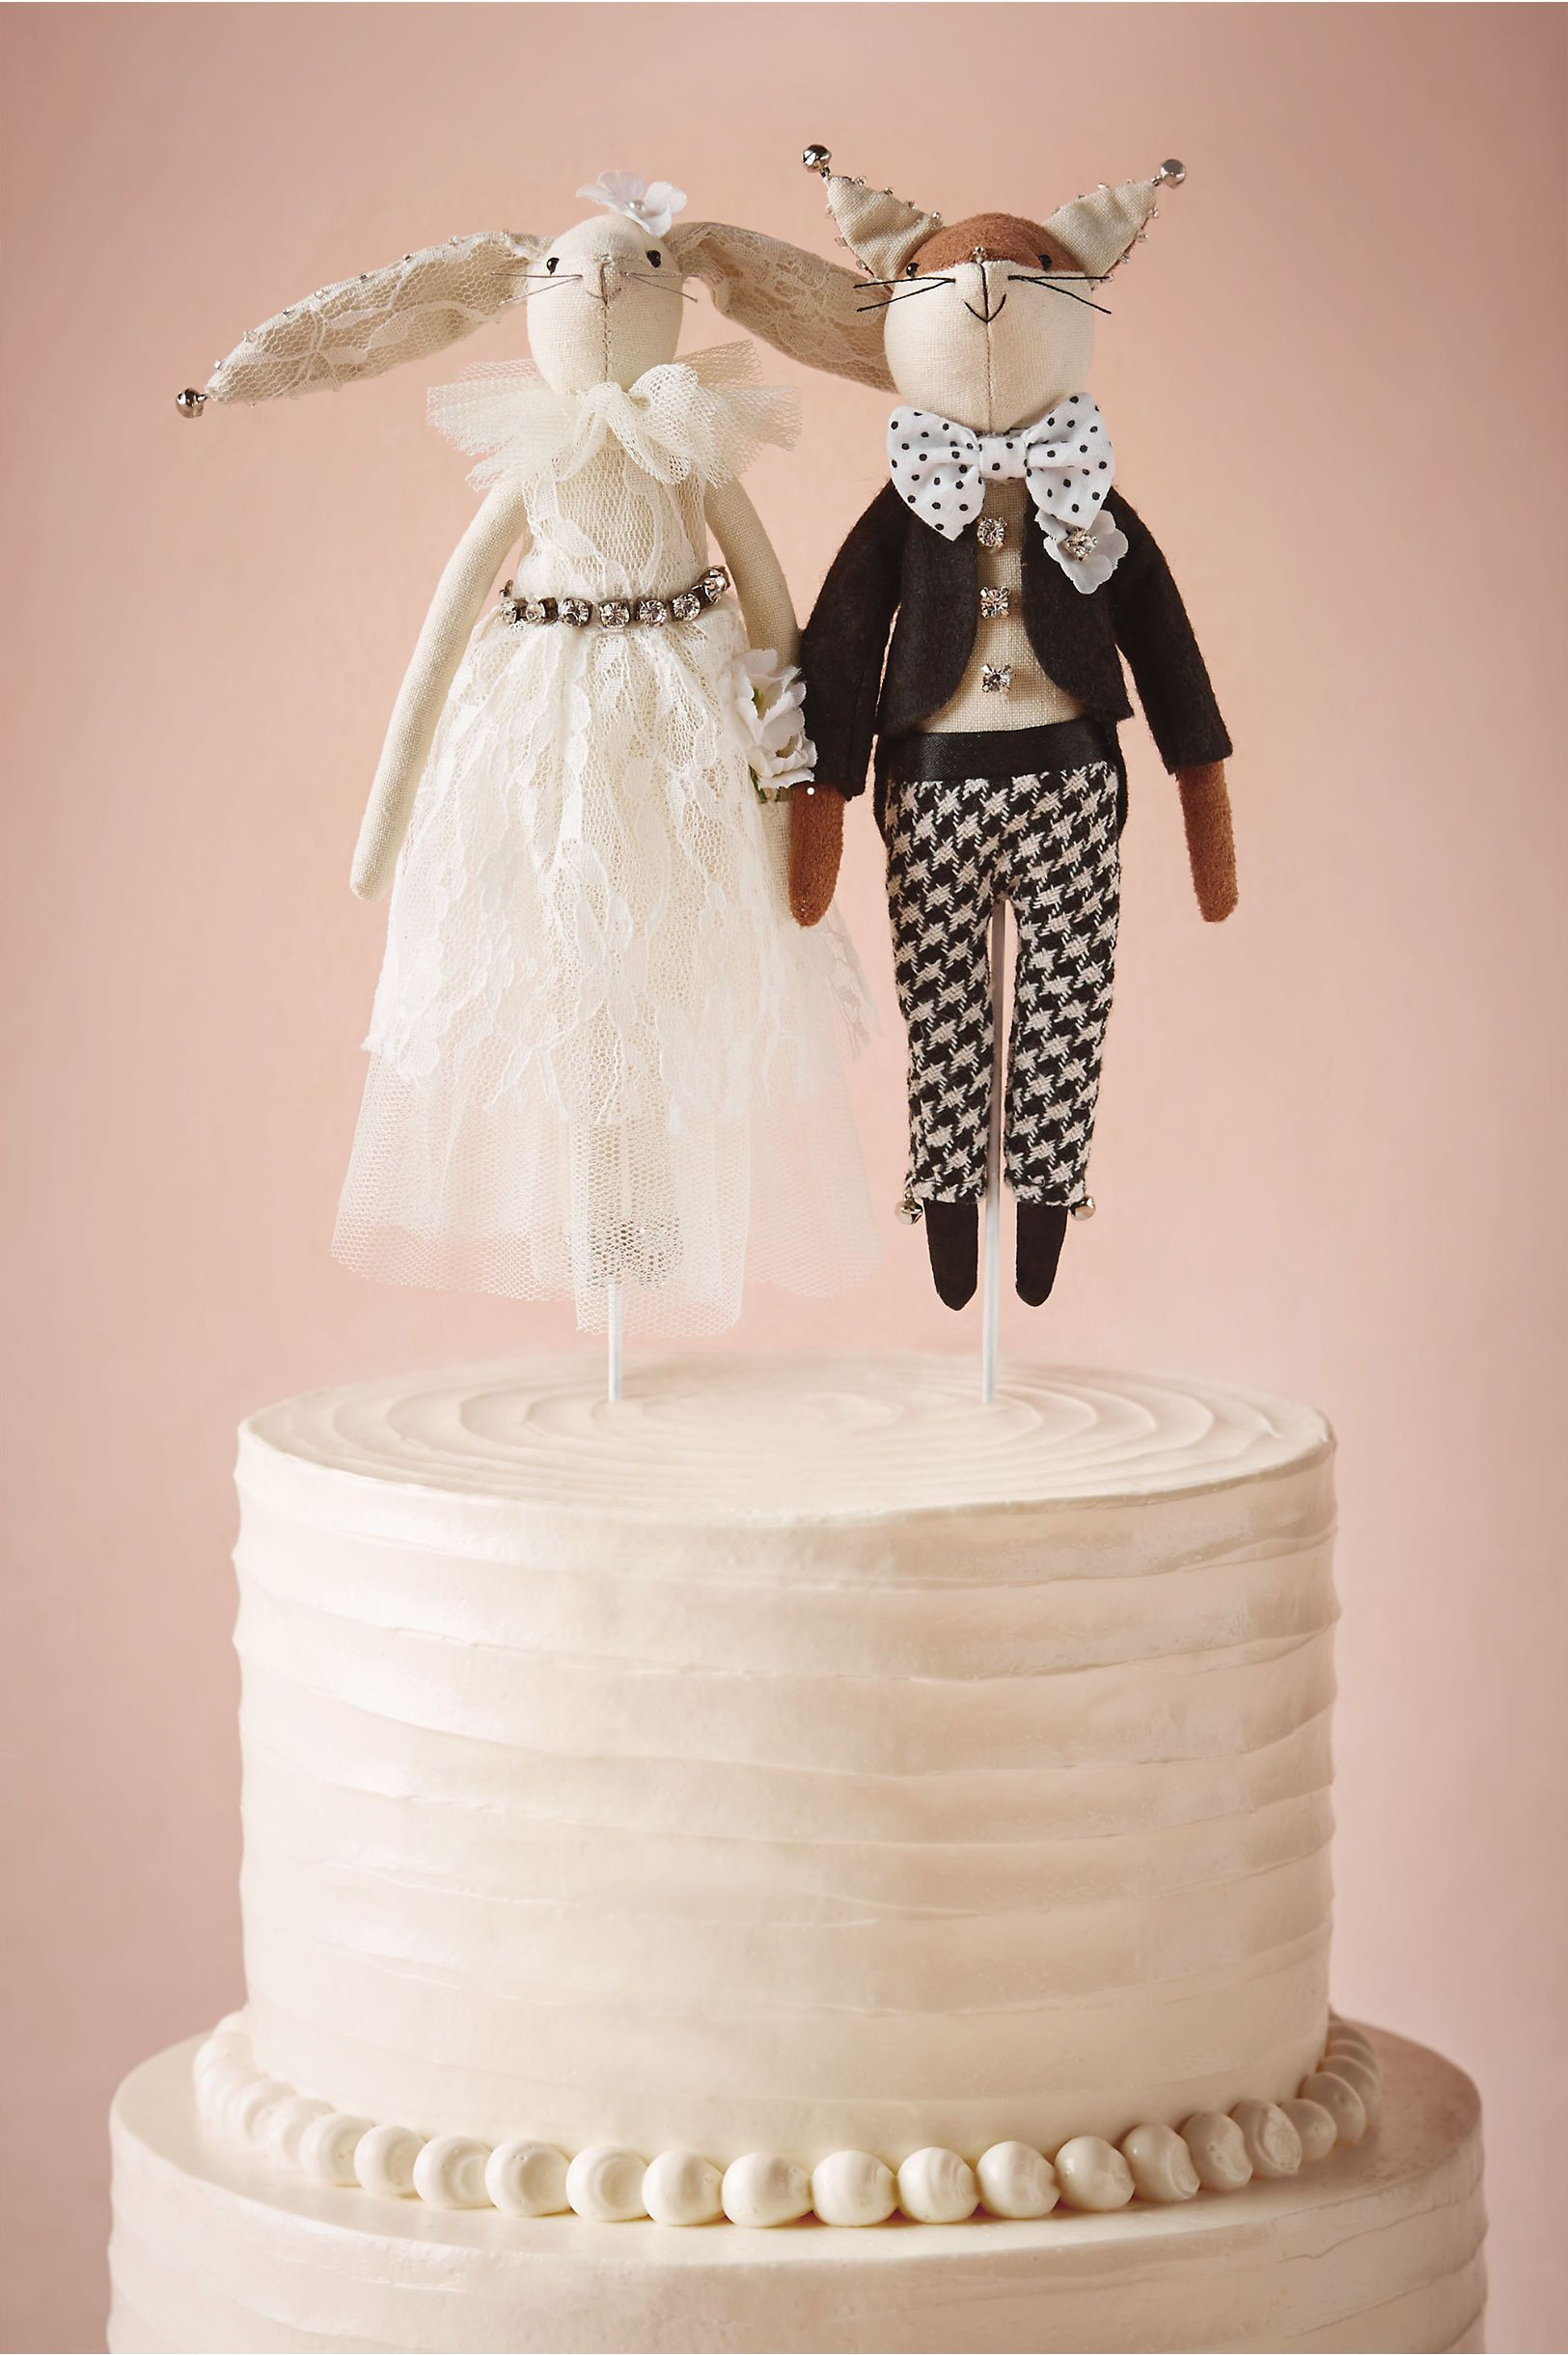 Wedding Cakes Accessories
 Woodland Creatures Cake Topper in Décor Cake Accessories